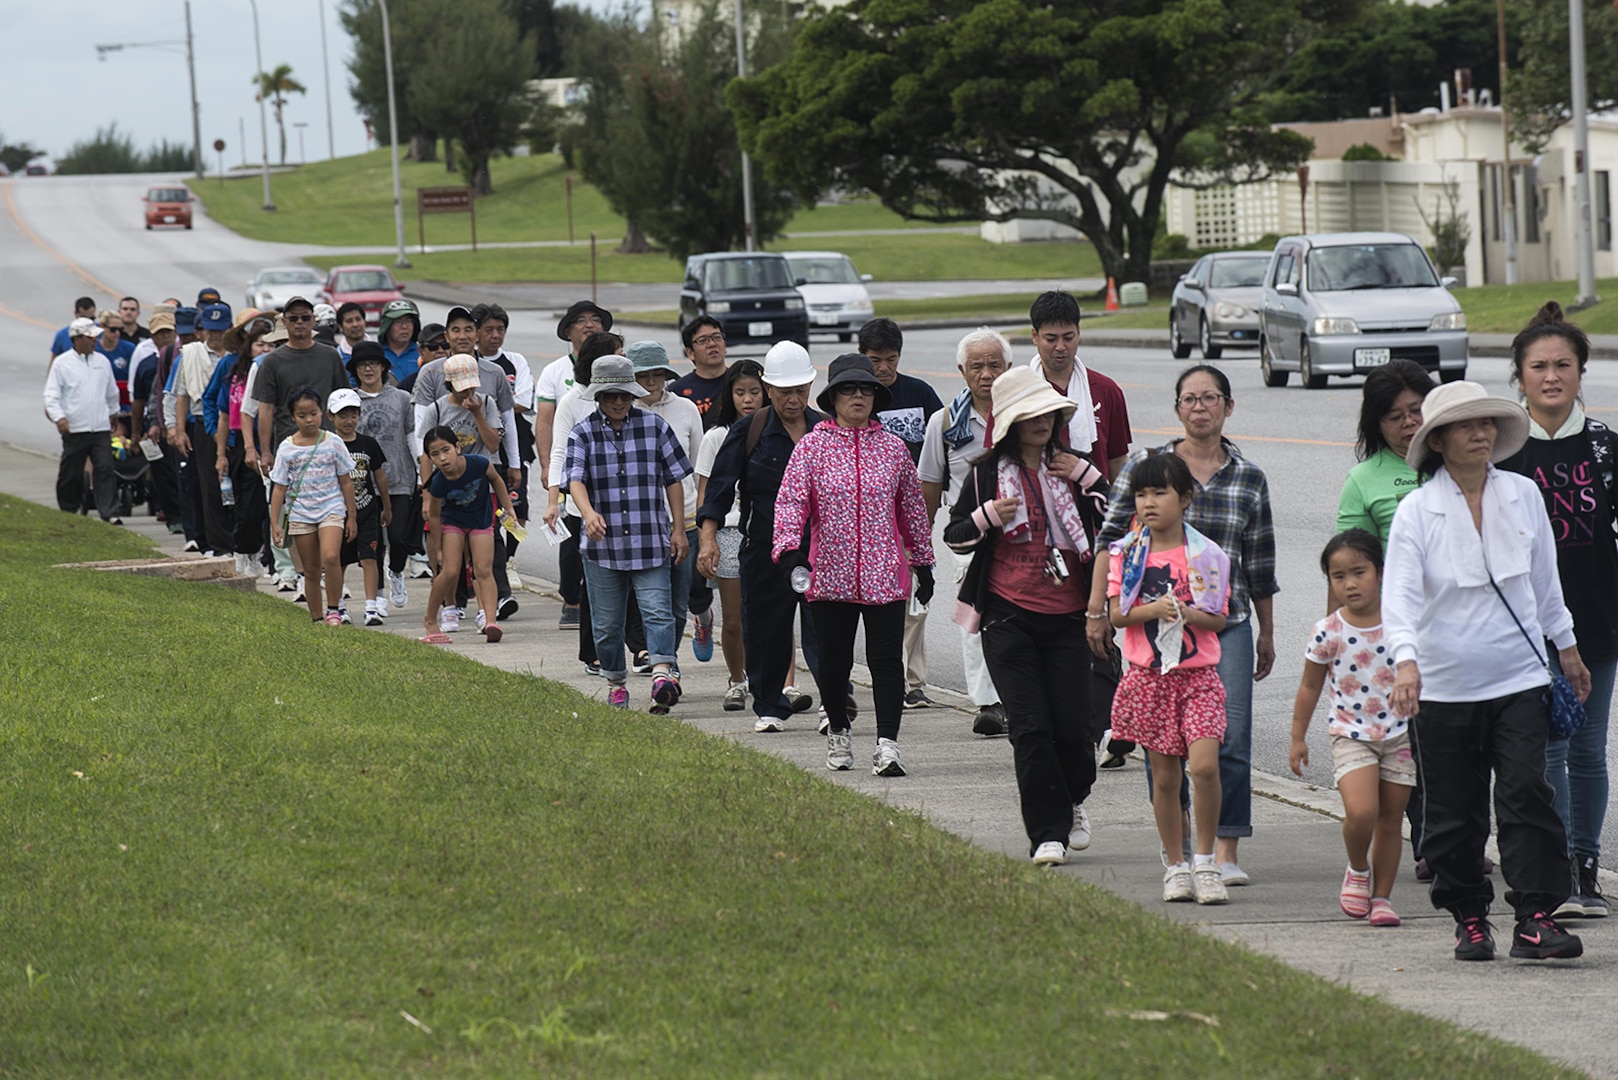 Residents of Chatan Town make their way through Kadena Air Base, Japan, as part of a bilateral tsunami evacuation exercise Dec. 4, 2016. U.S. Military and civil authorities must be prepared to face any emergency that could occur on Okinawa. The tsunami evacuation exercise is one possible scenario that both nations can train for, execute and evaluate.